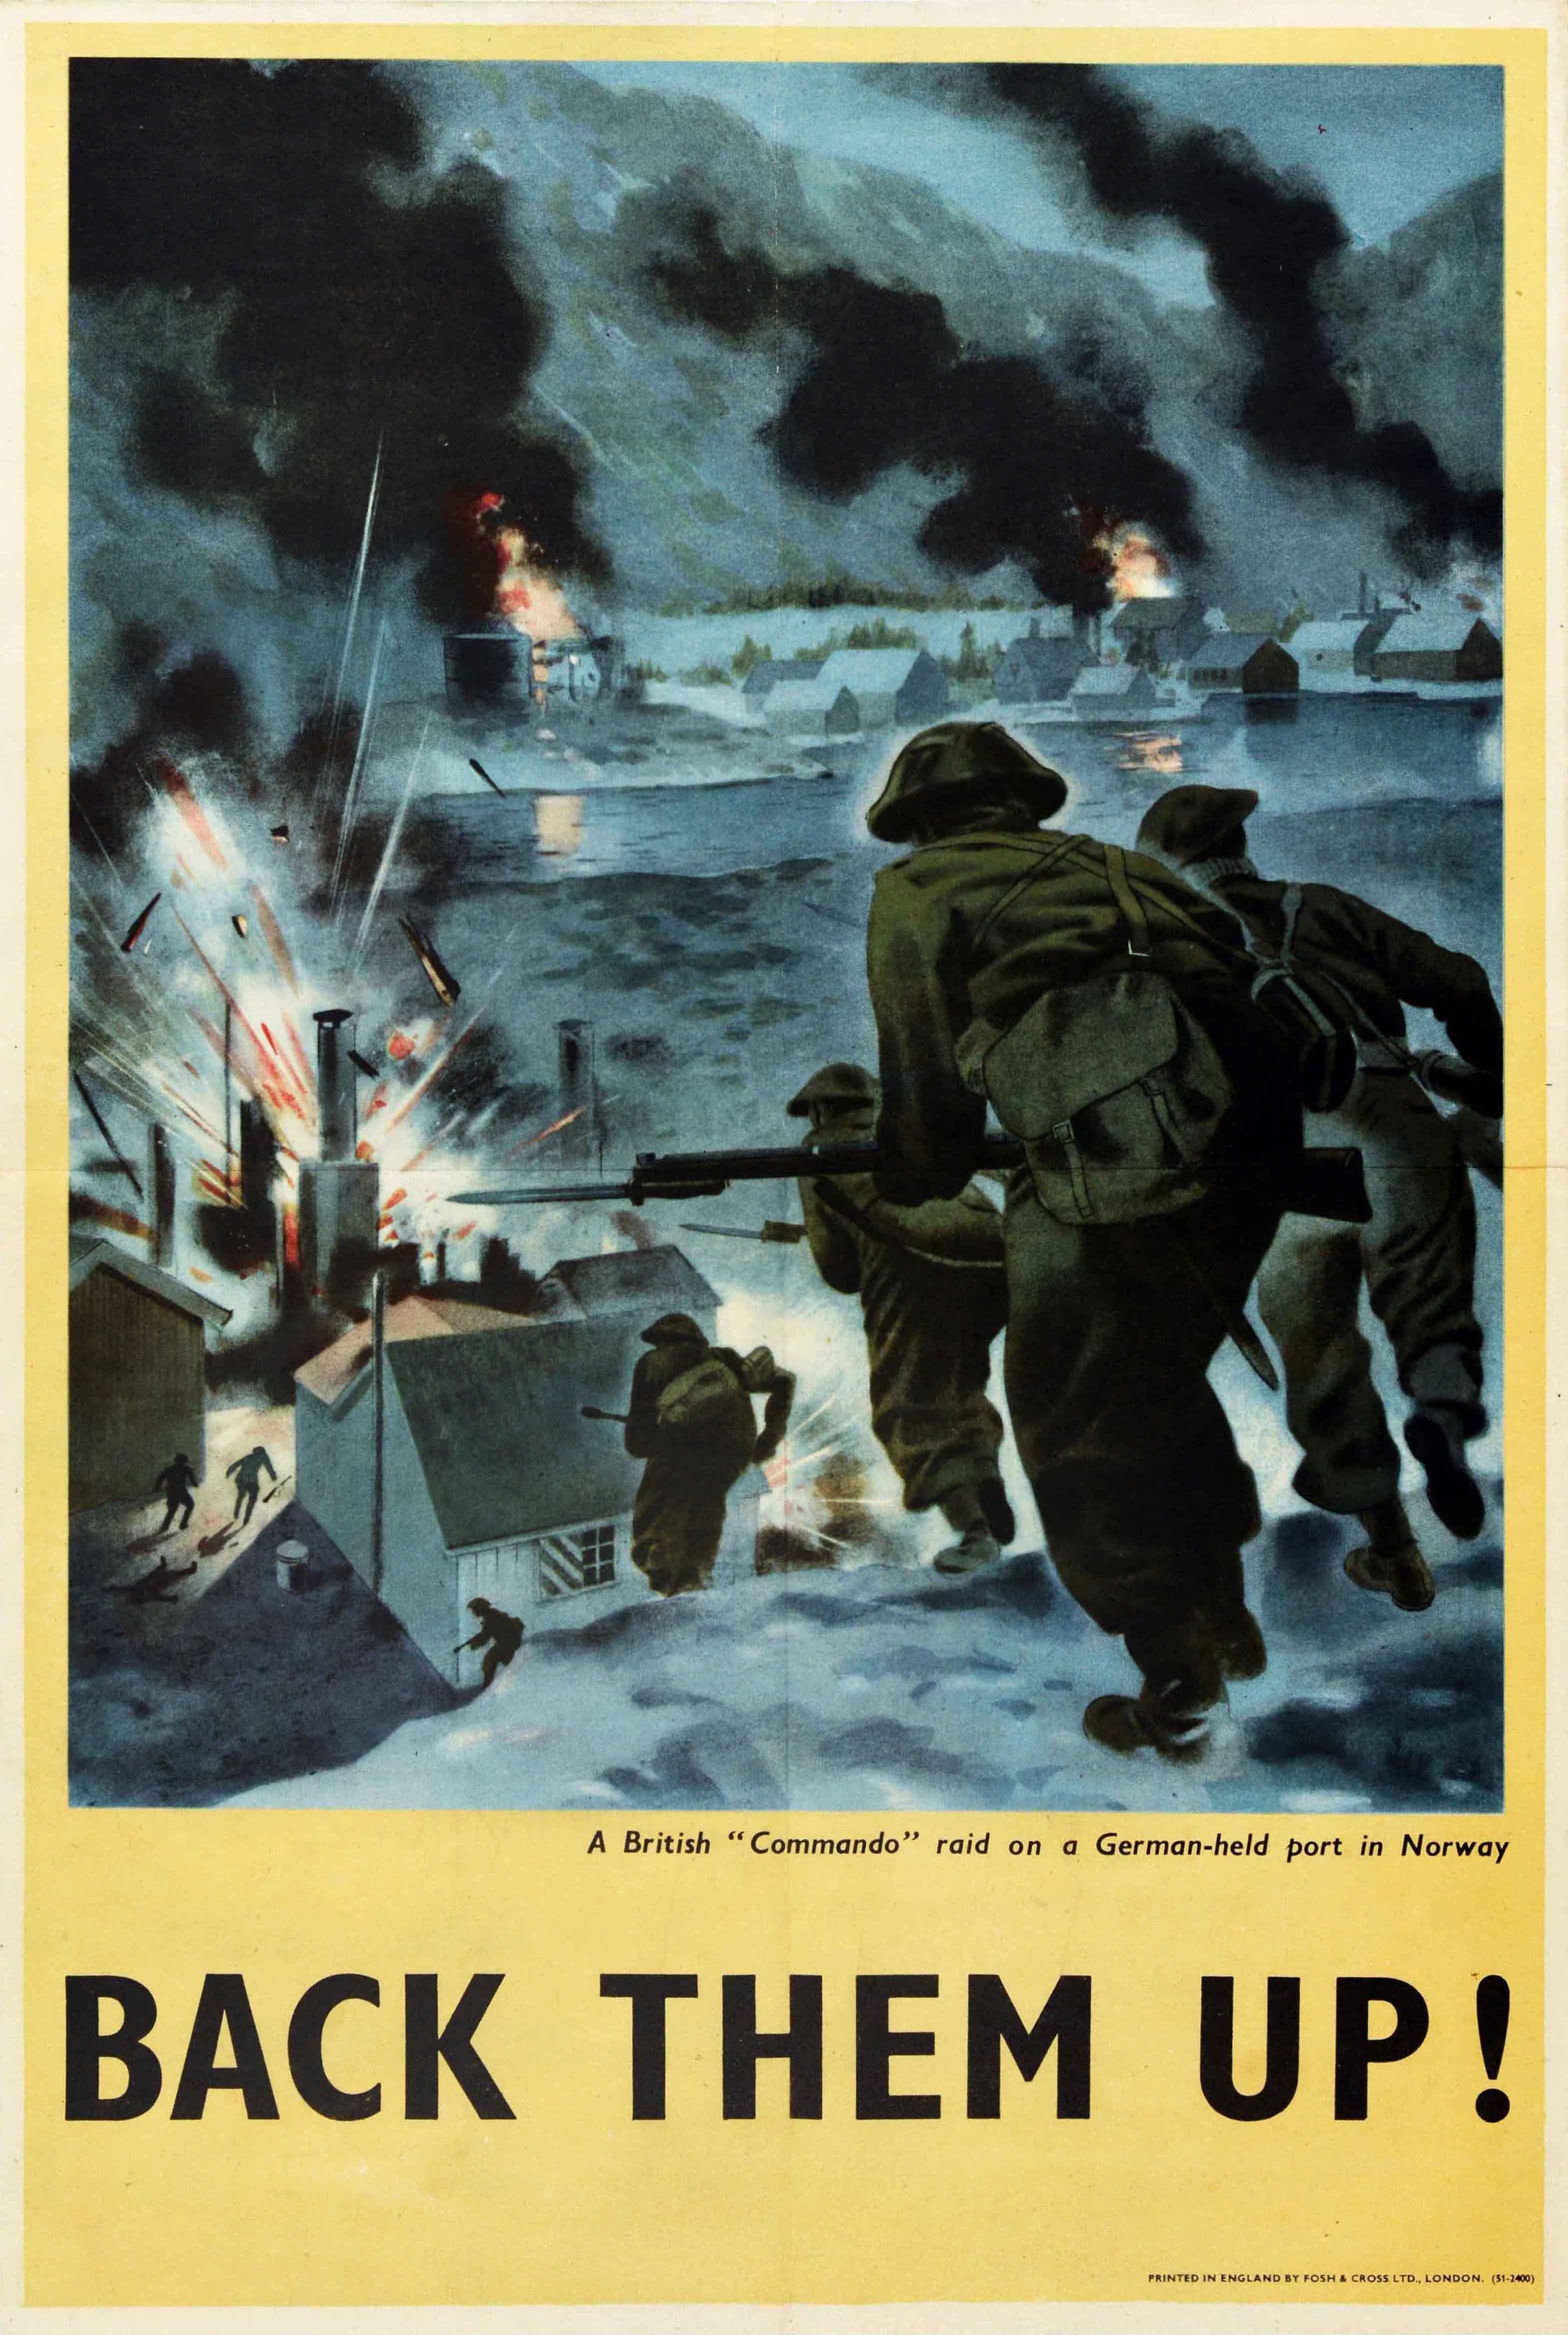 Original vintage World War Two propaganda poster - Back Them Up! Dynamic battle scene illustration featuring British soldiers with bayonet rifle guns running down a hill towards a German held port in Norway with explosions and buildings on fire on